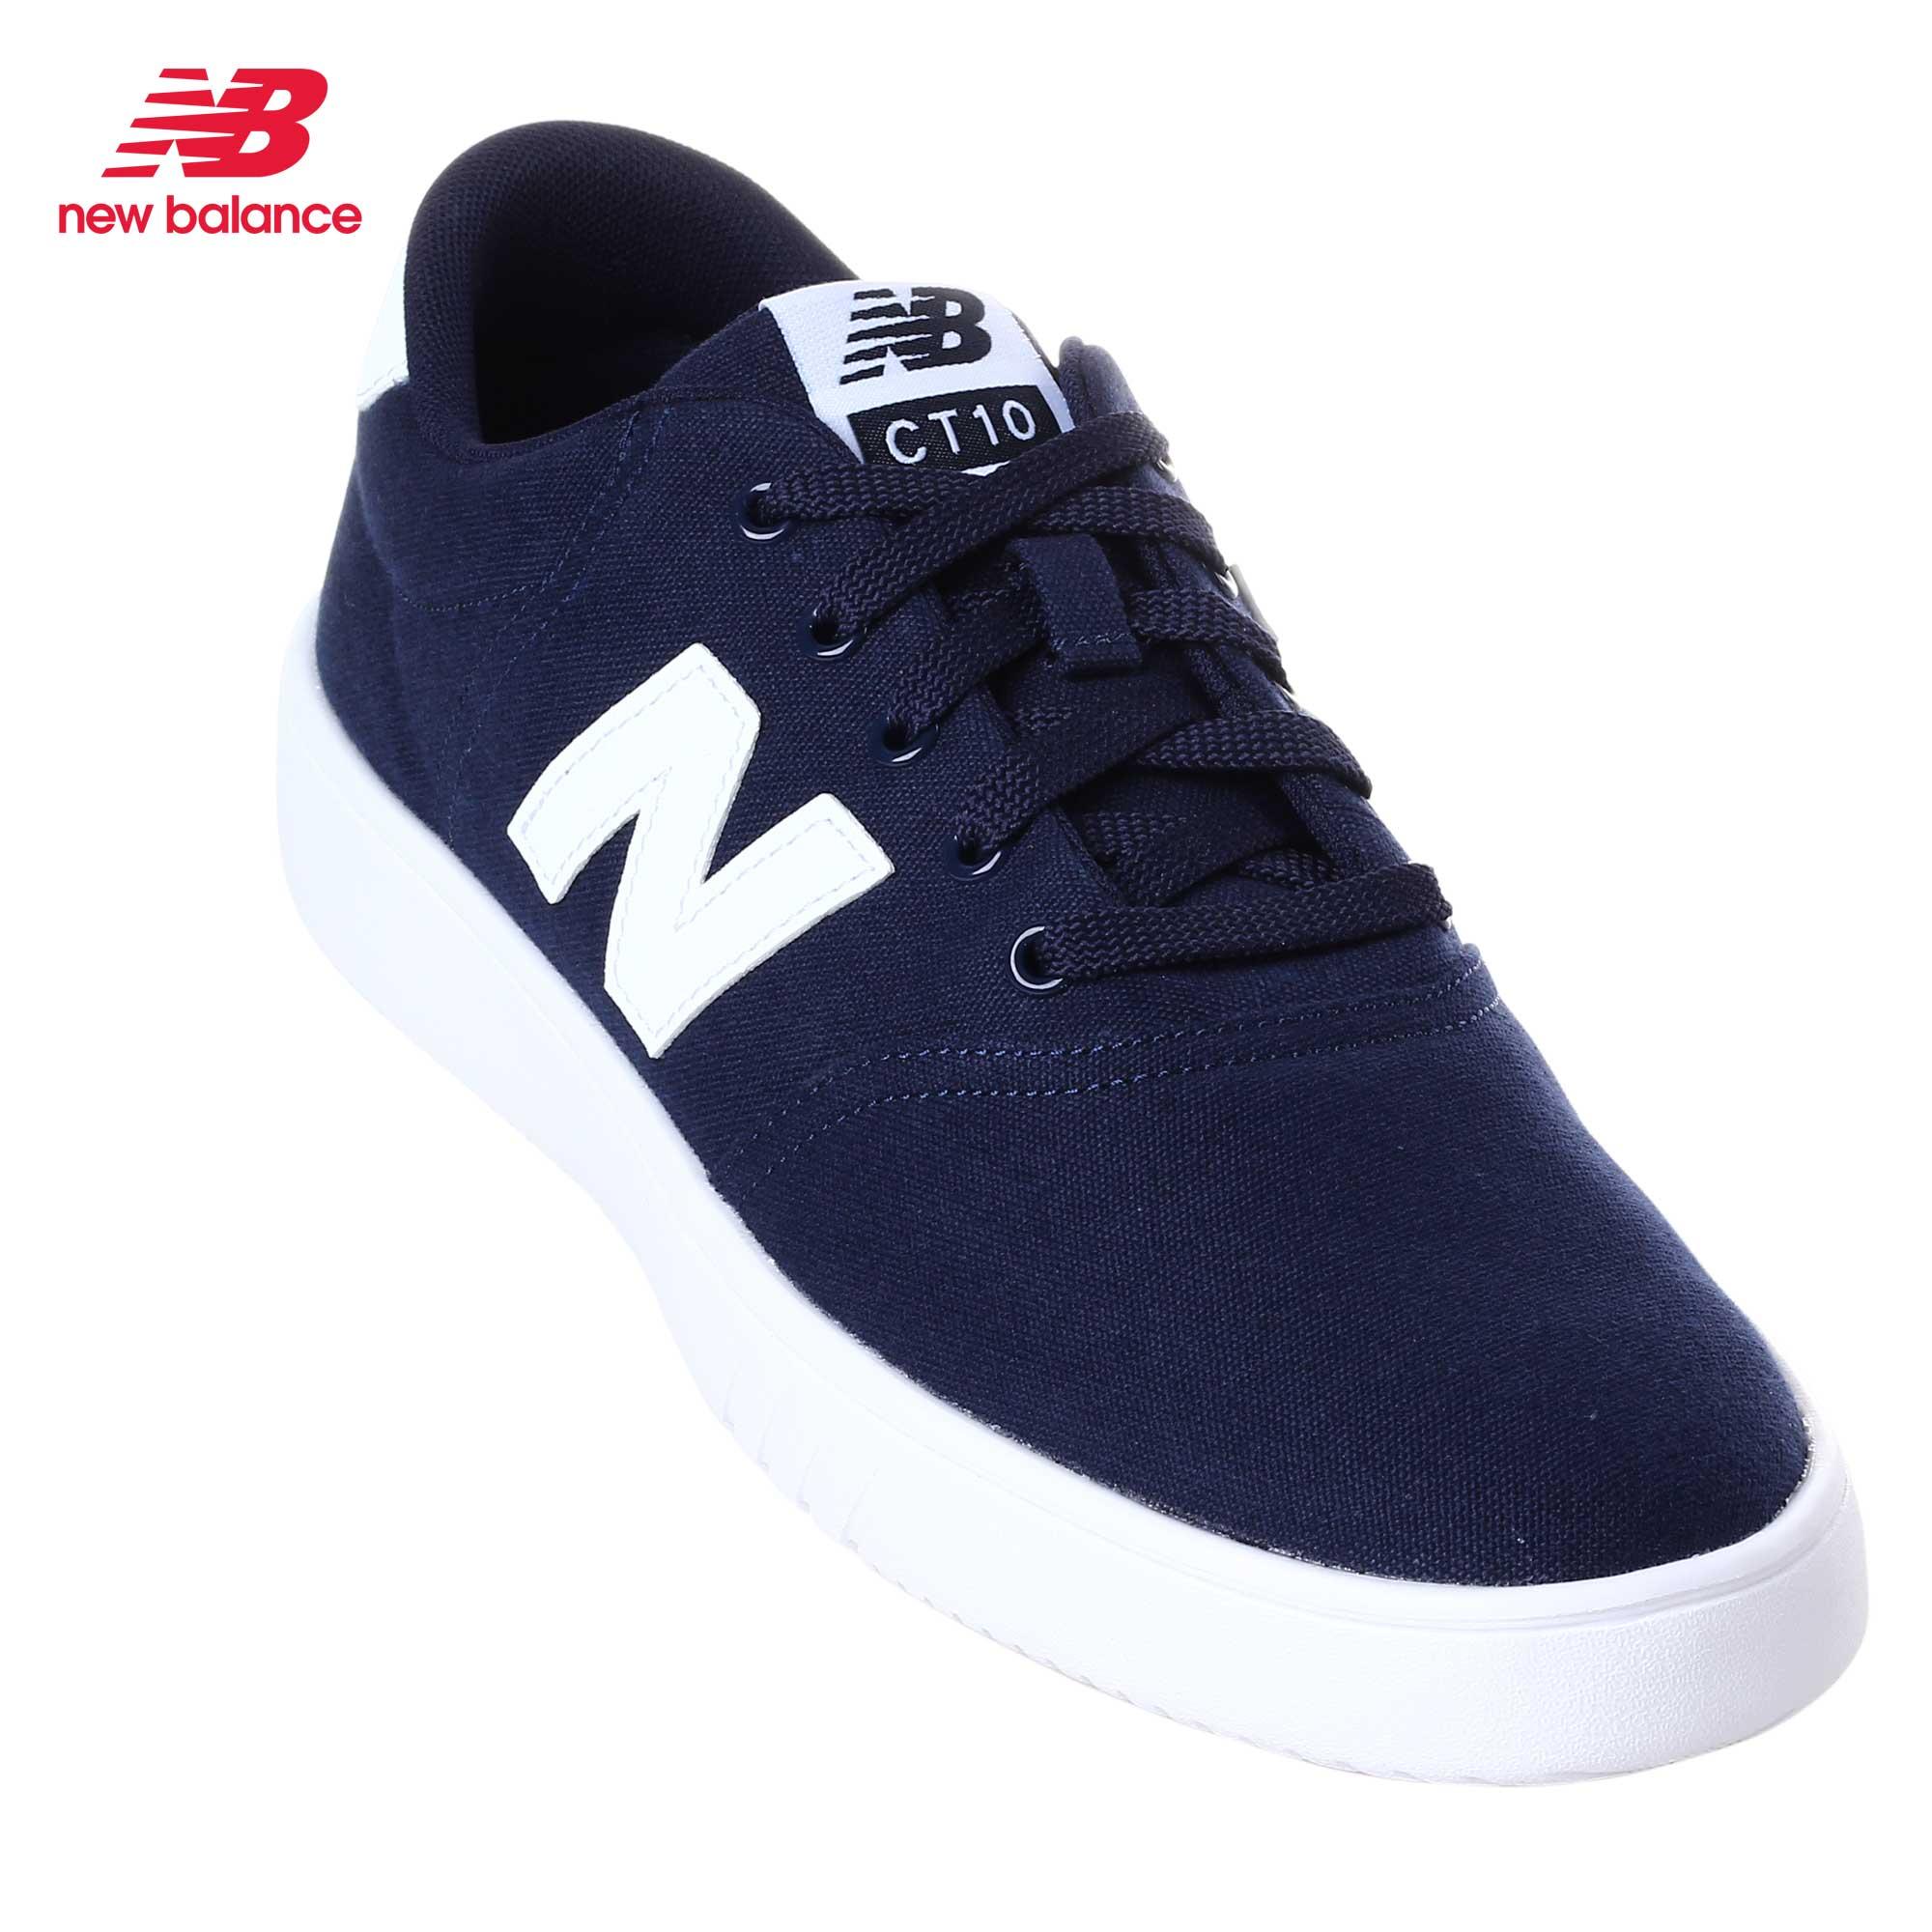 new balance lifestyle shoes review